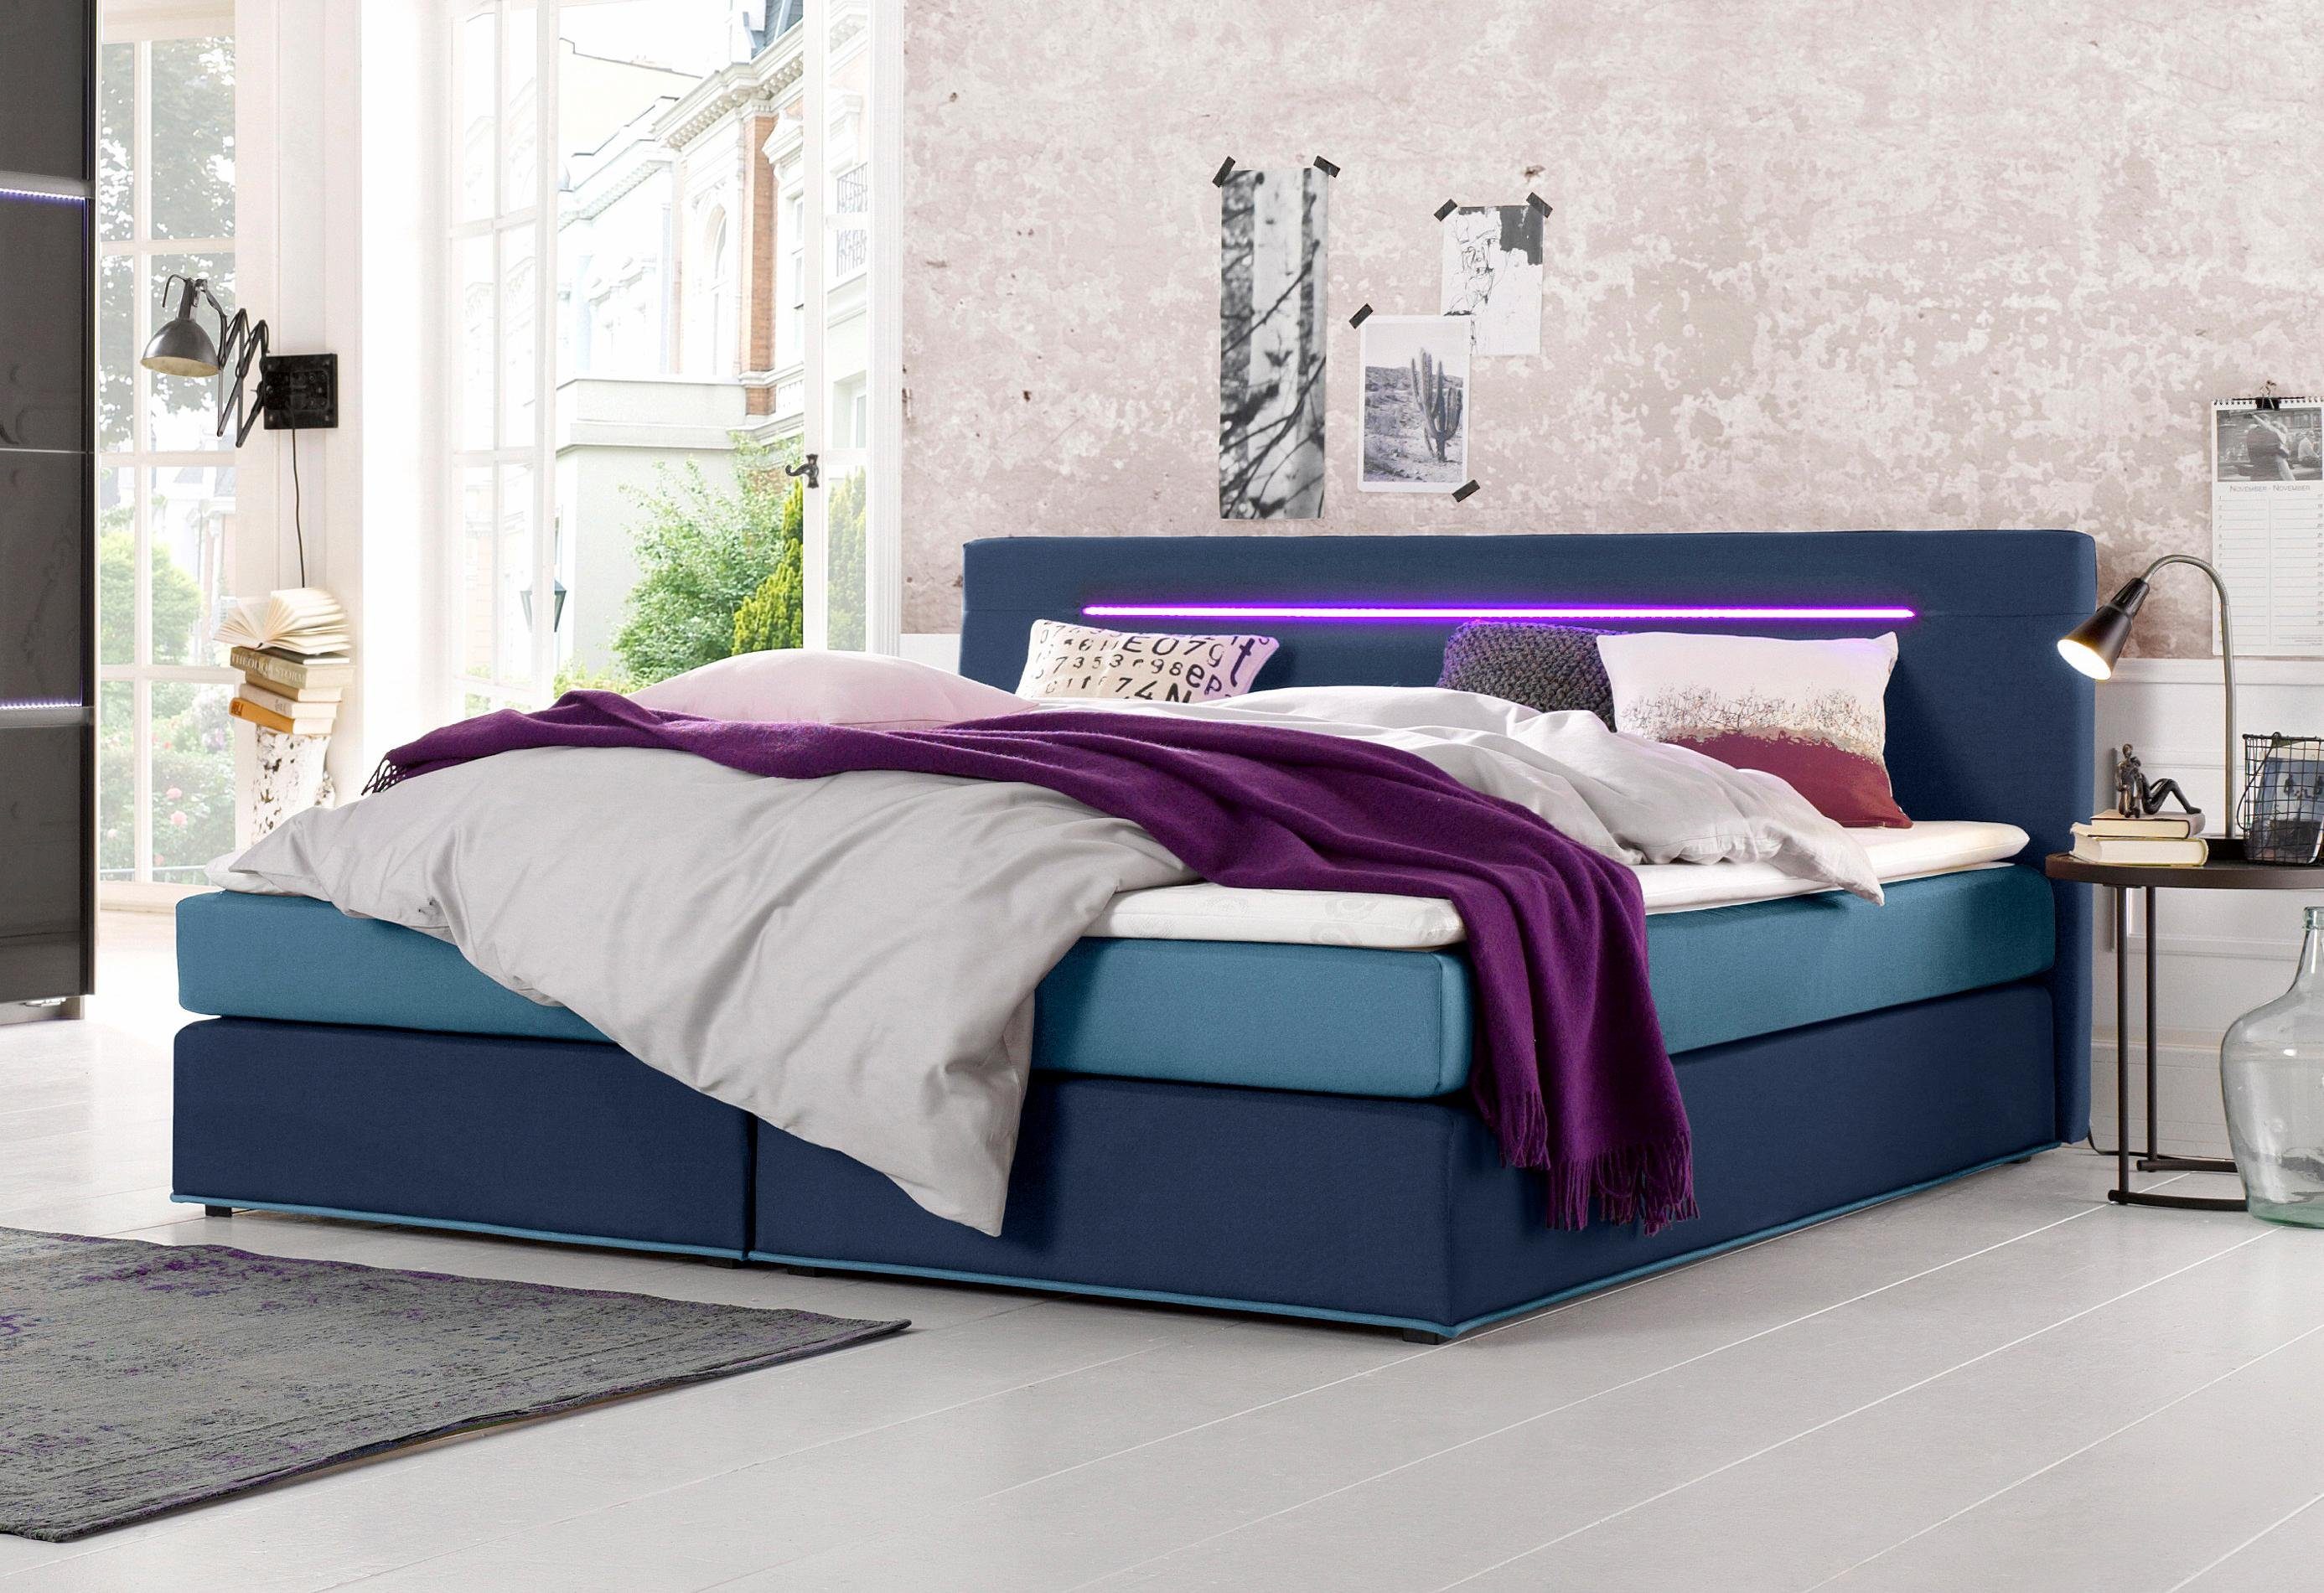 COLLECTION AB Boxspringbett, inkl. LED-Beleuchtung mit Farbwechsel und Topper-Otto